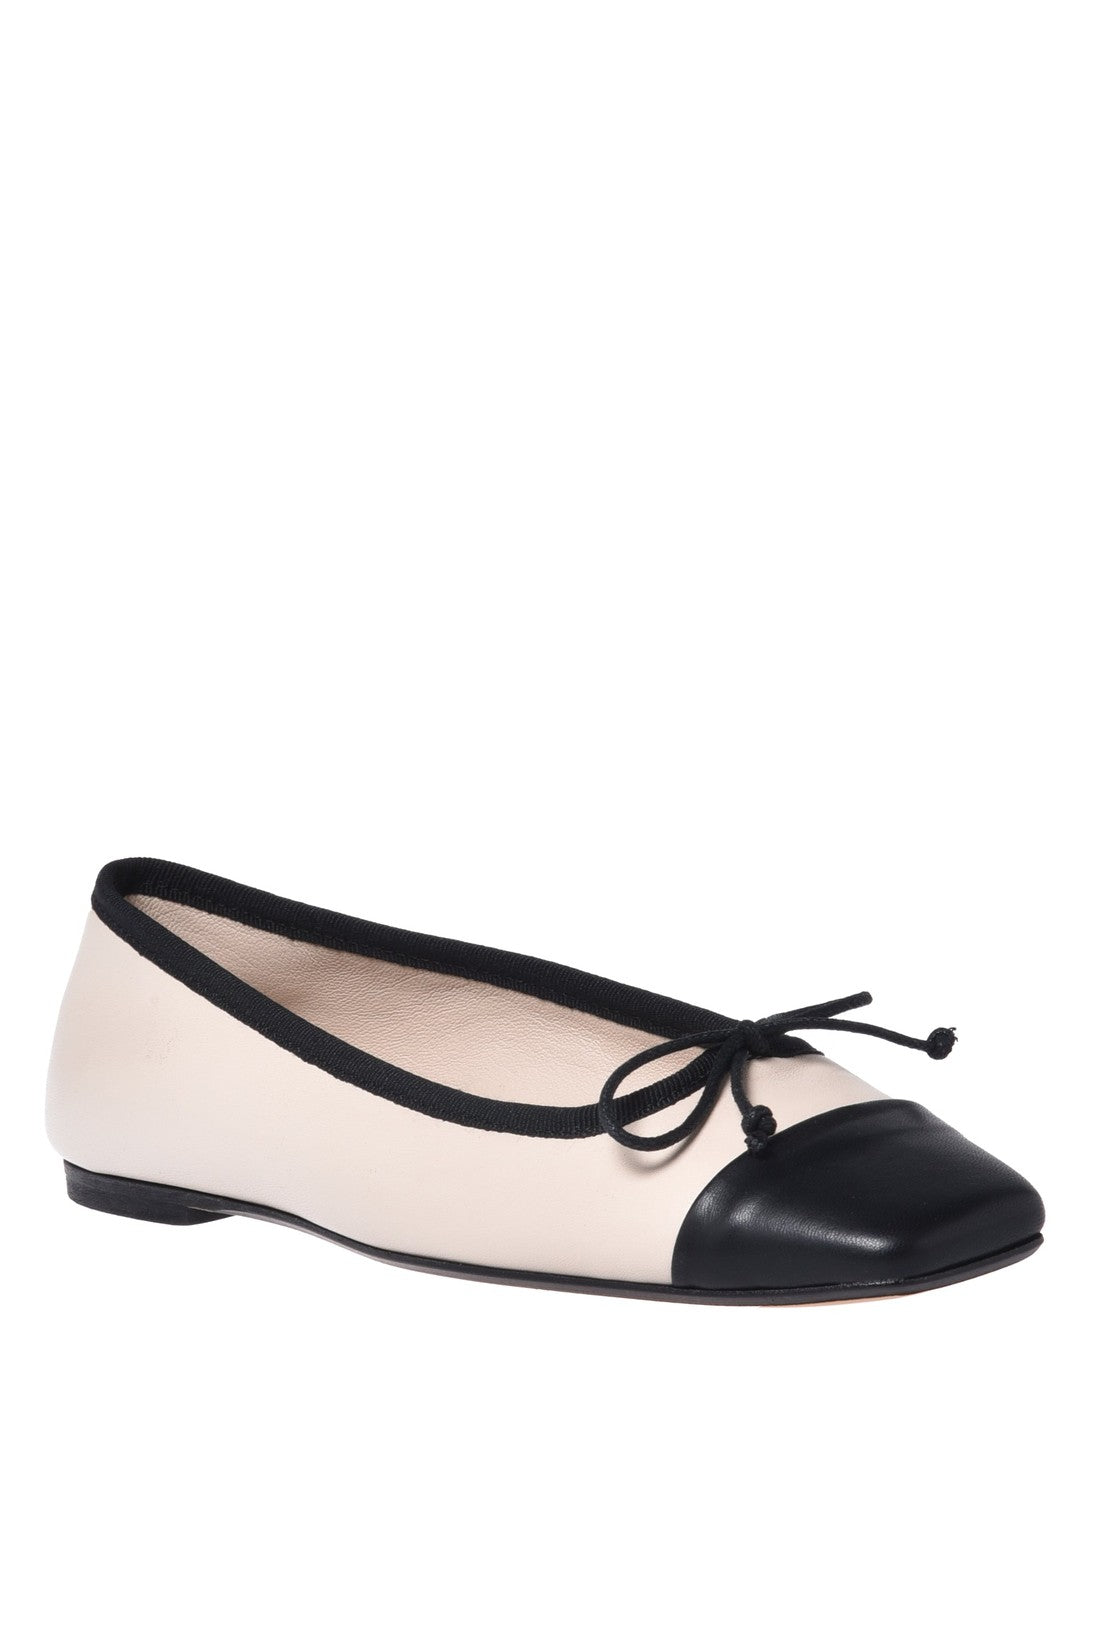 BALDININI-OUTLET-SALE-Ballerina-pump-in-black-and-beige-nappa-leather-Halbschuhe-35-ARCHIVE-COLLECTION.jpg